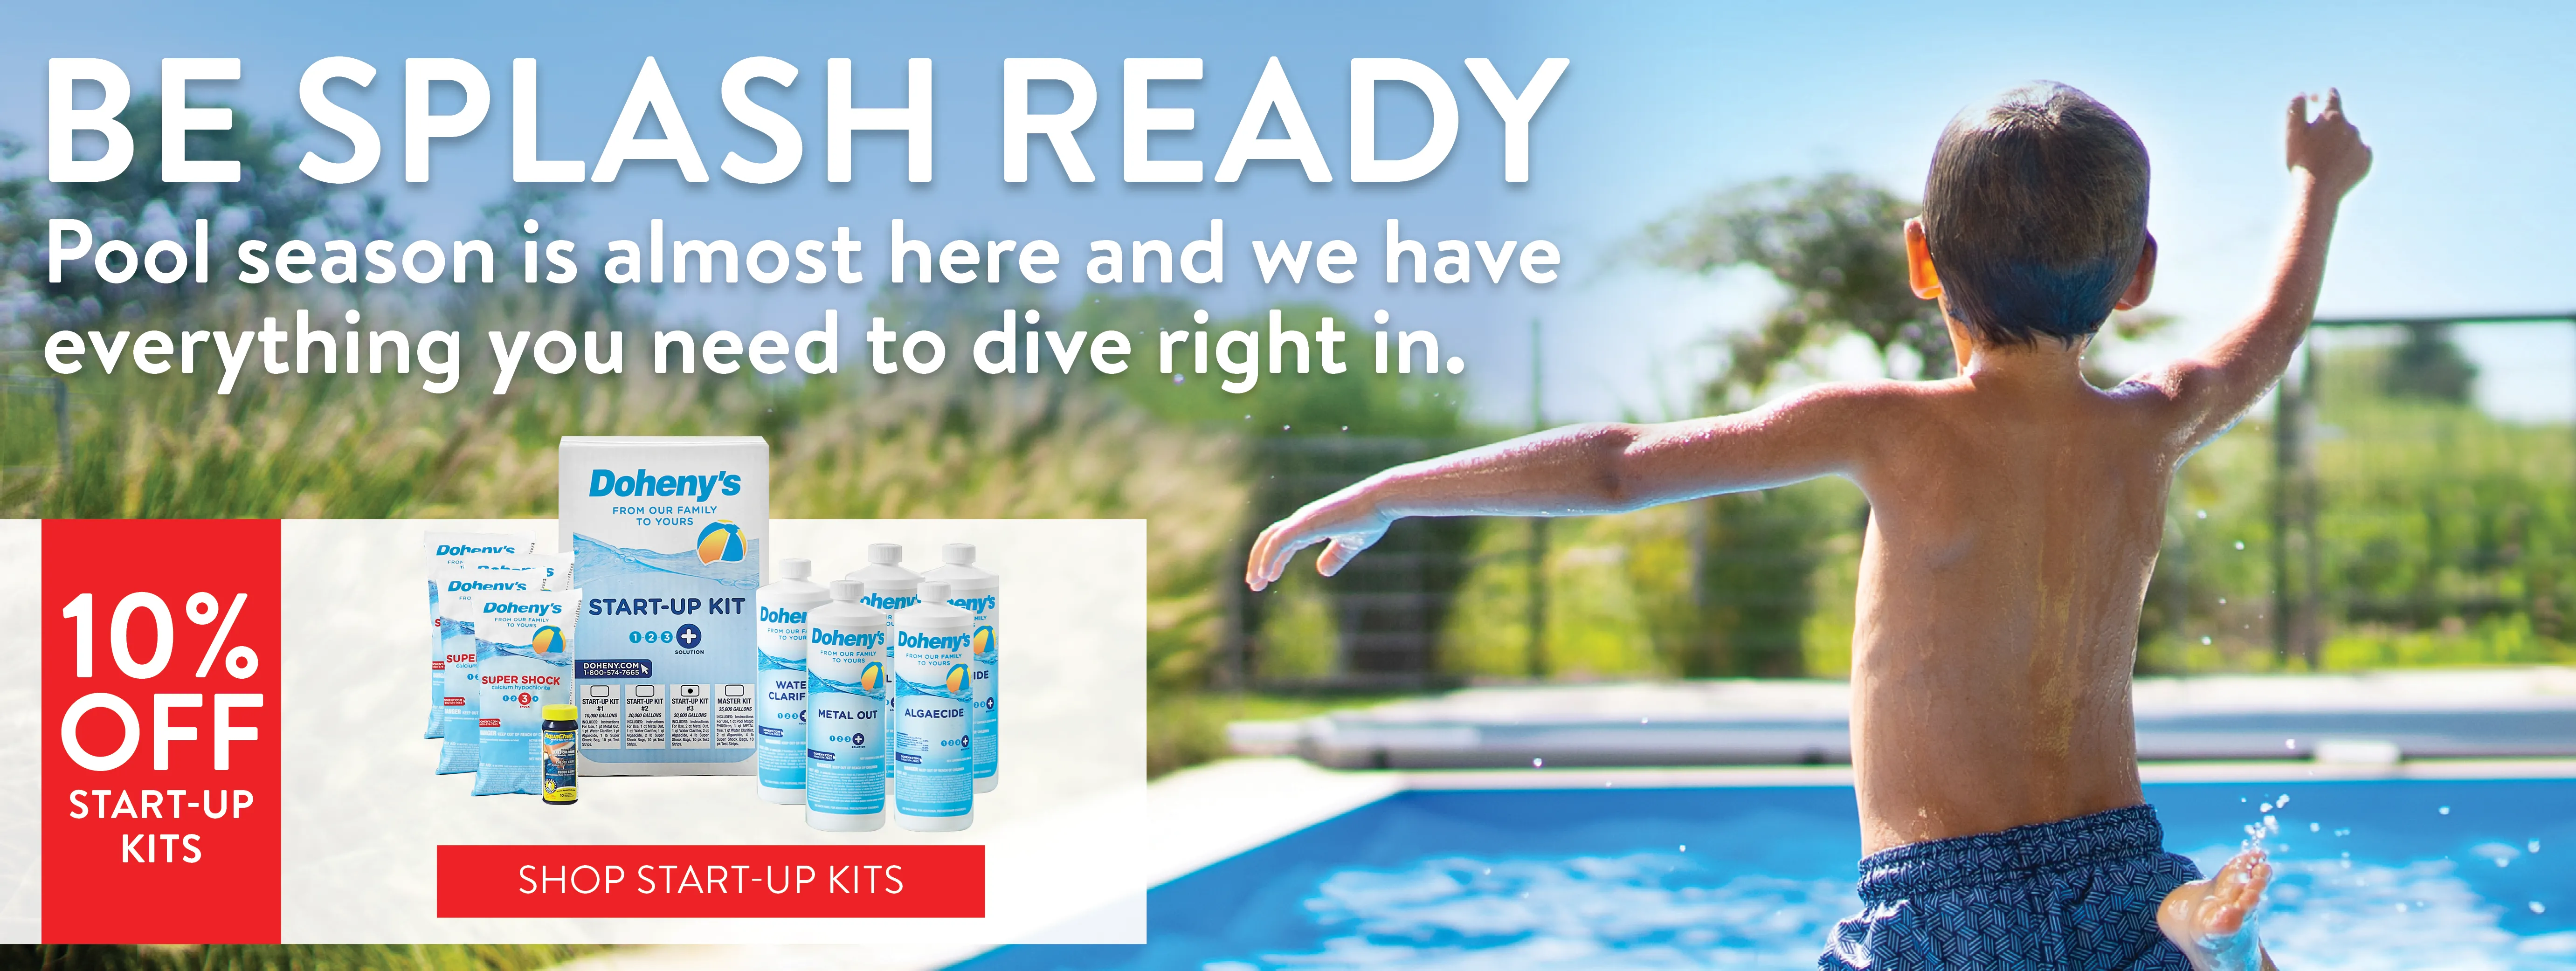 Be Splash Ready! Pool season is almost here and we have everything you need to dive right in! Shop Start-Up Kits now.